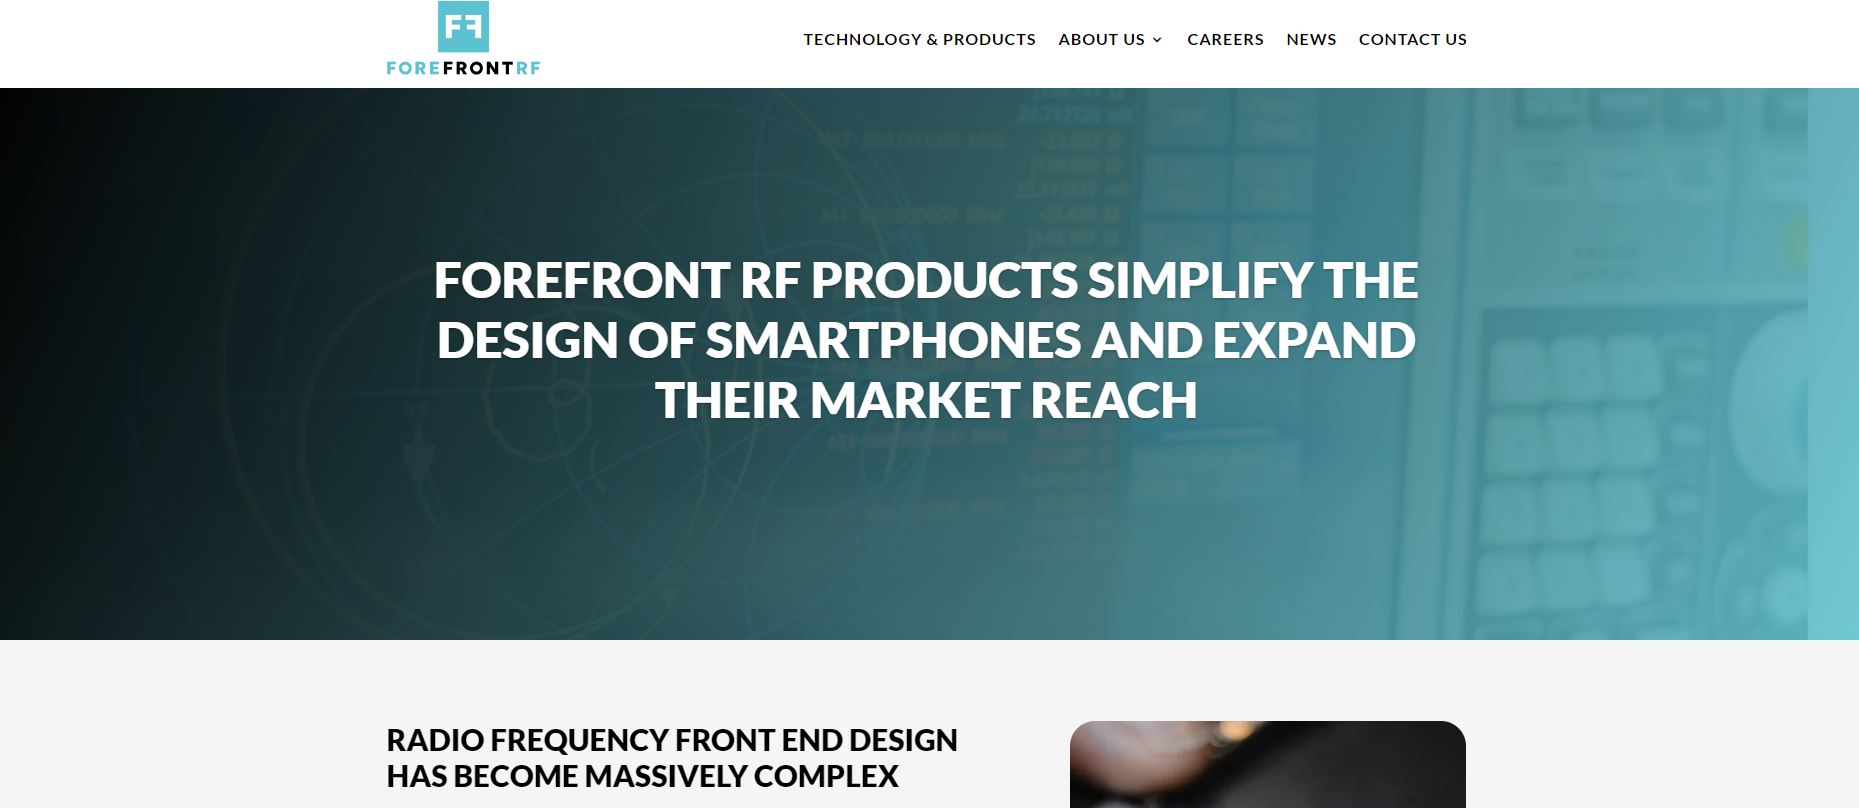 With recent funding of $6.7M, Forefront RF has garnered investment from reputed firms